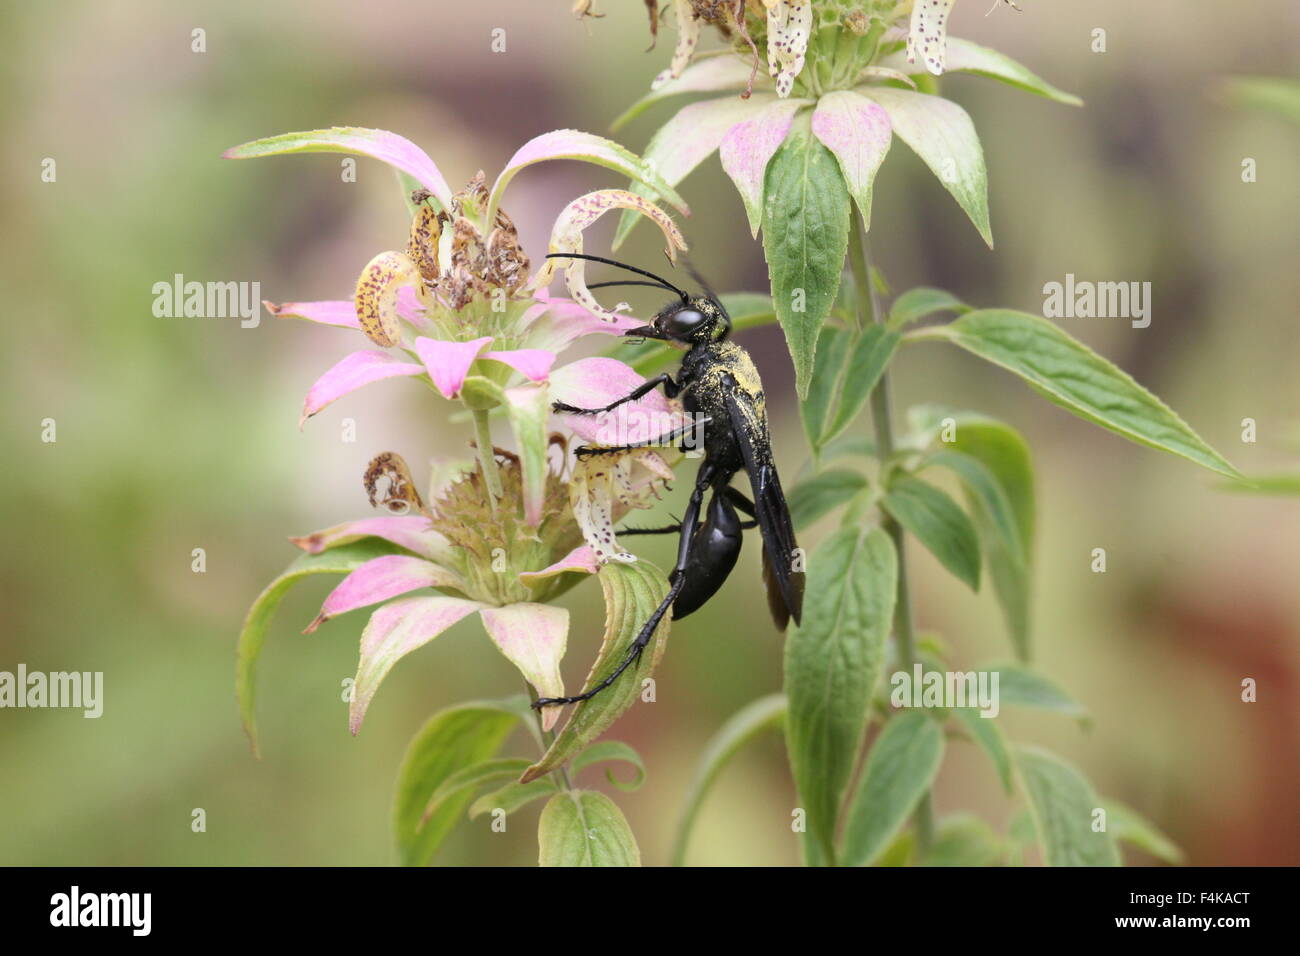 Pollen-covered wasp on a flower. Stock Photo